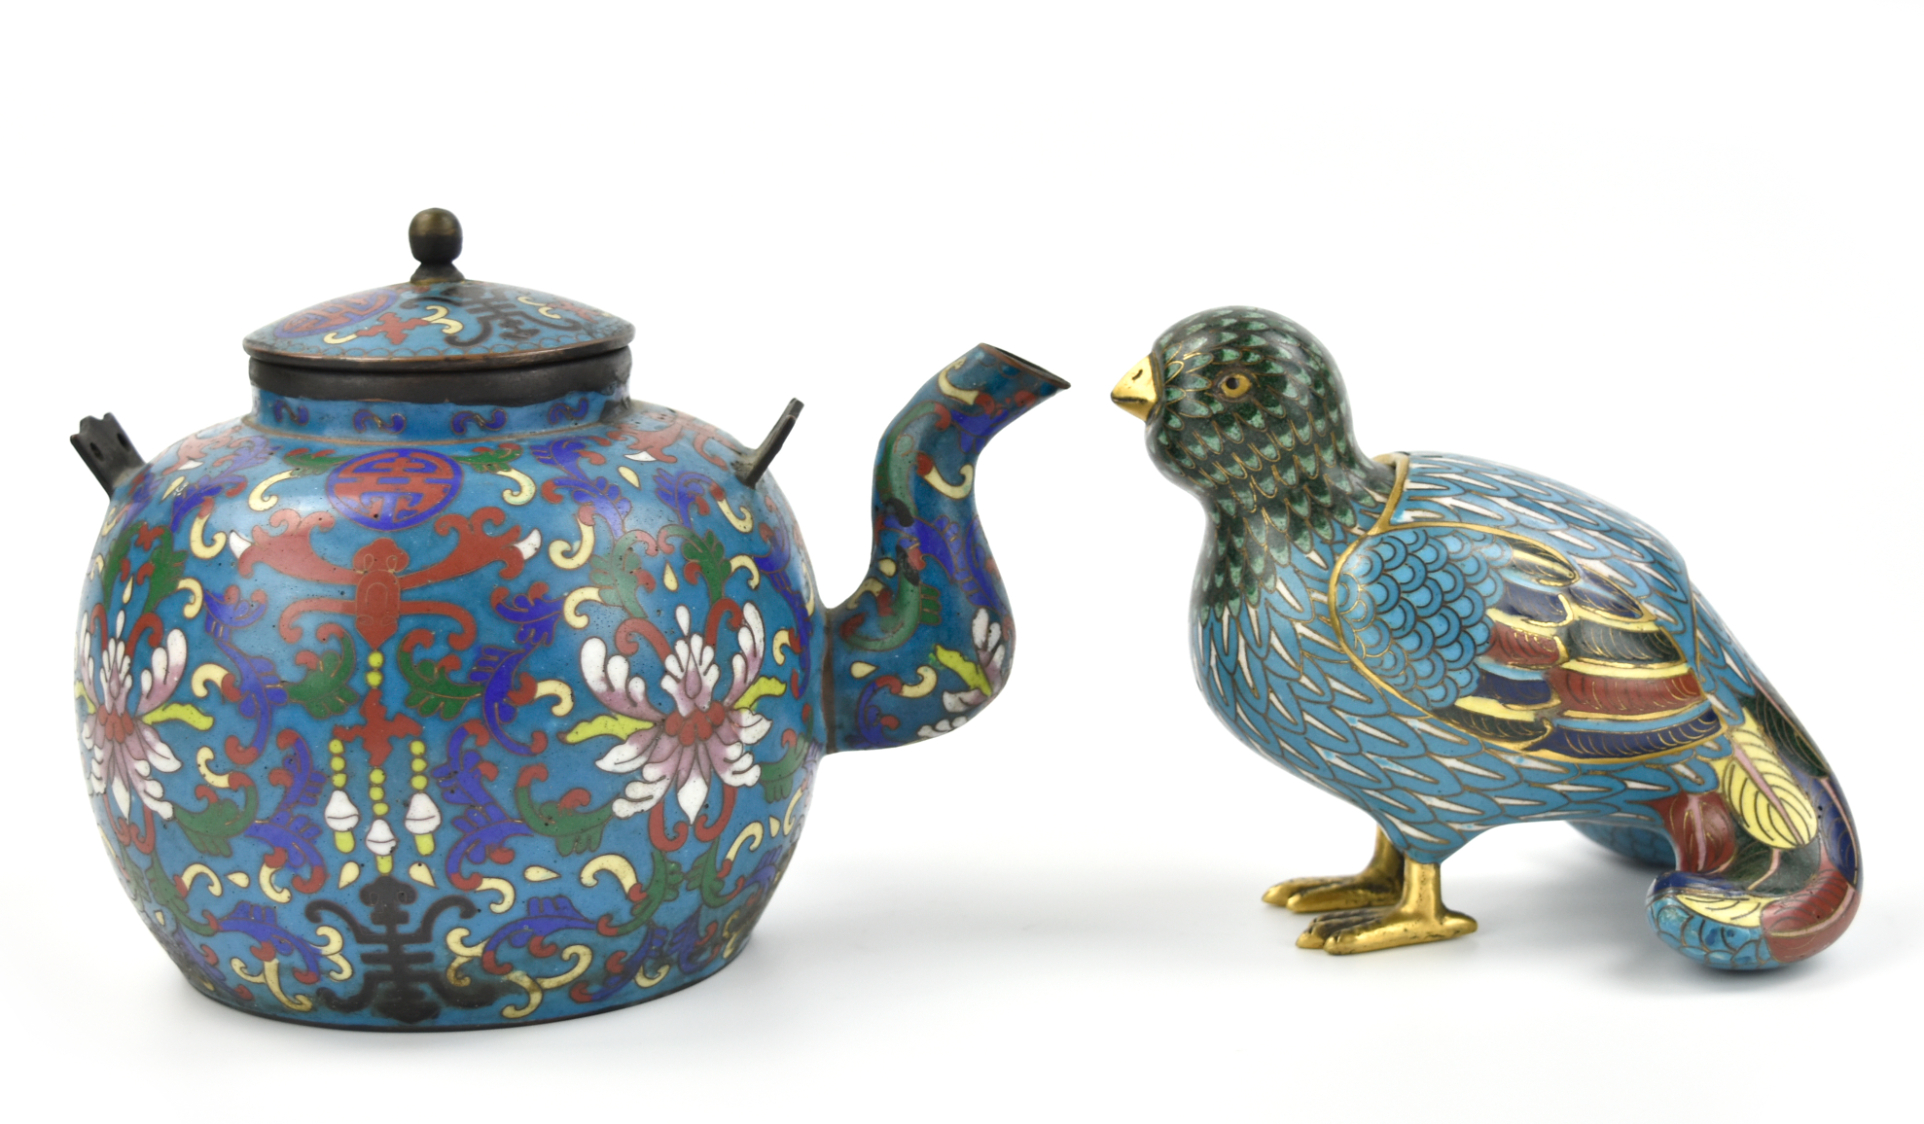 GROUP OF 2 CHINESE CLOISONNE BIRD